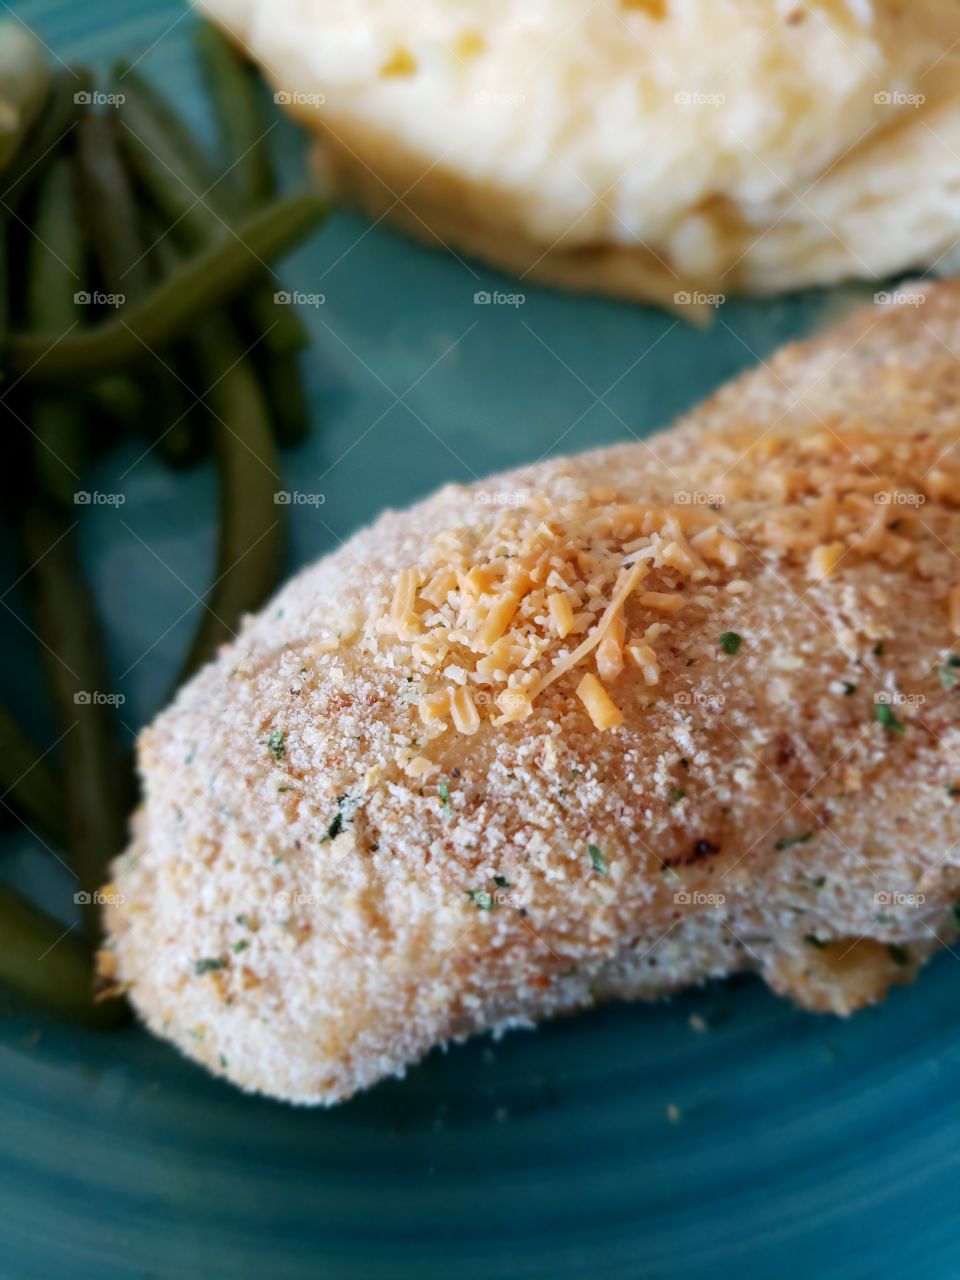 Fine details on a freshly baked chicken breast on a plate served with mashed potatoes and green beans.